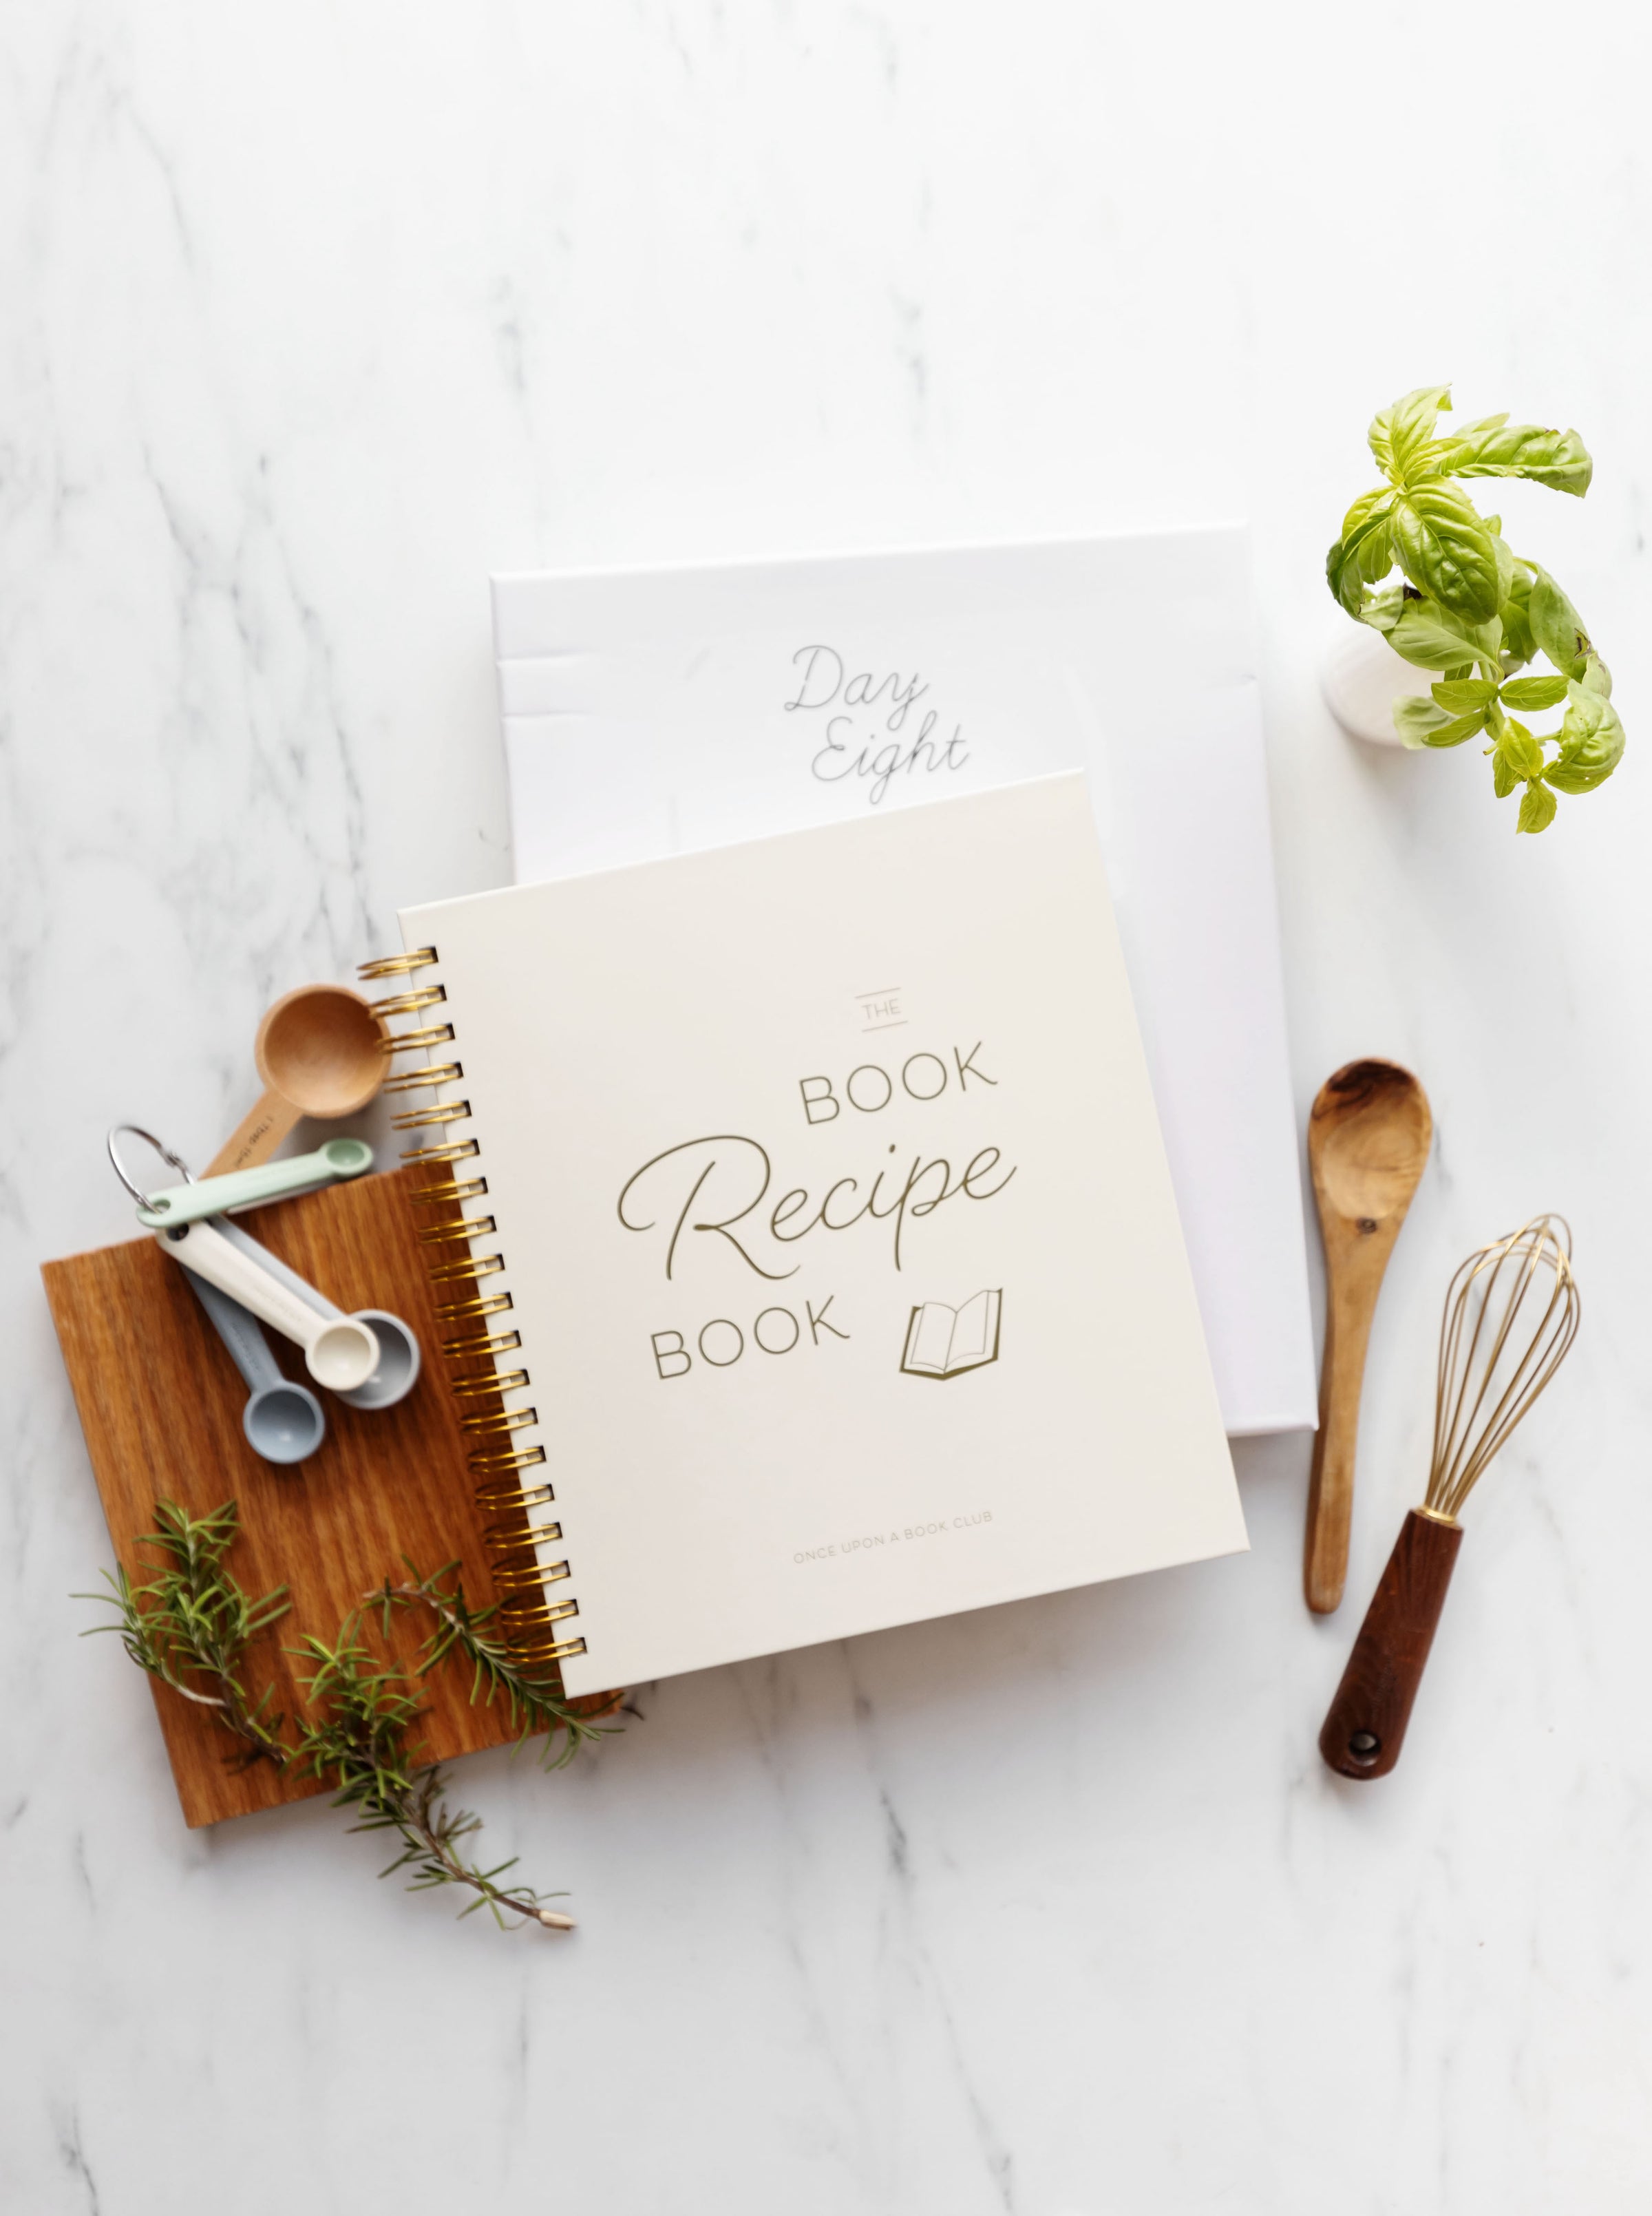 A wooden-covered Book Recipe Book sits on a white marble counter. It is surrounded by greenery, a wooden cutting board, a set of measuring spoons, a whisk, and a wooden spoon.